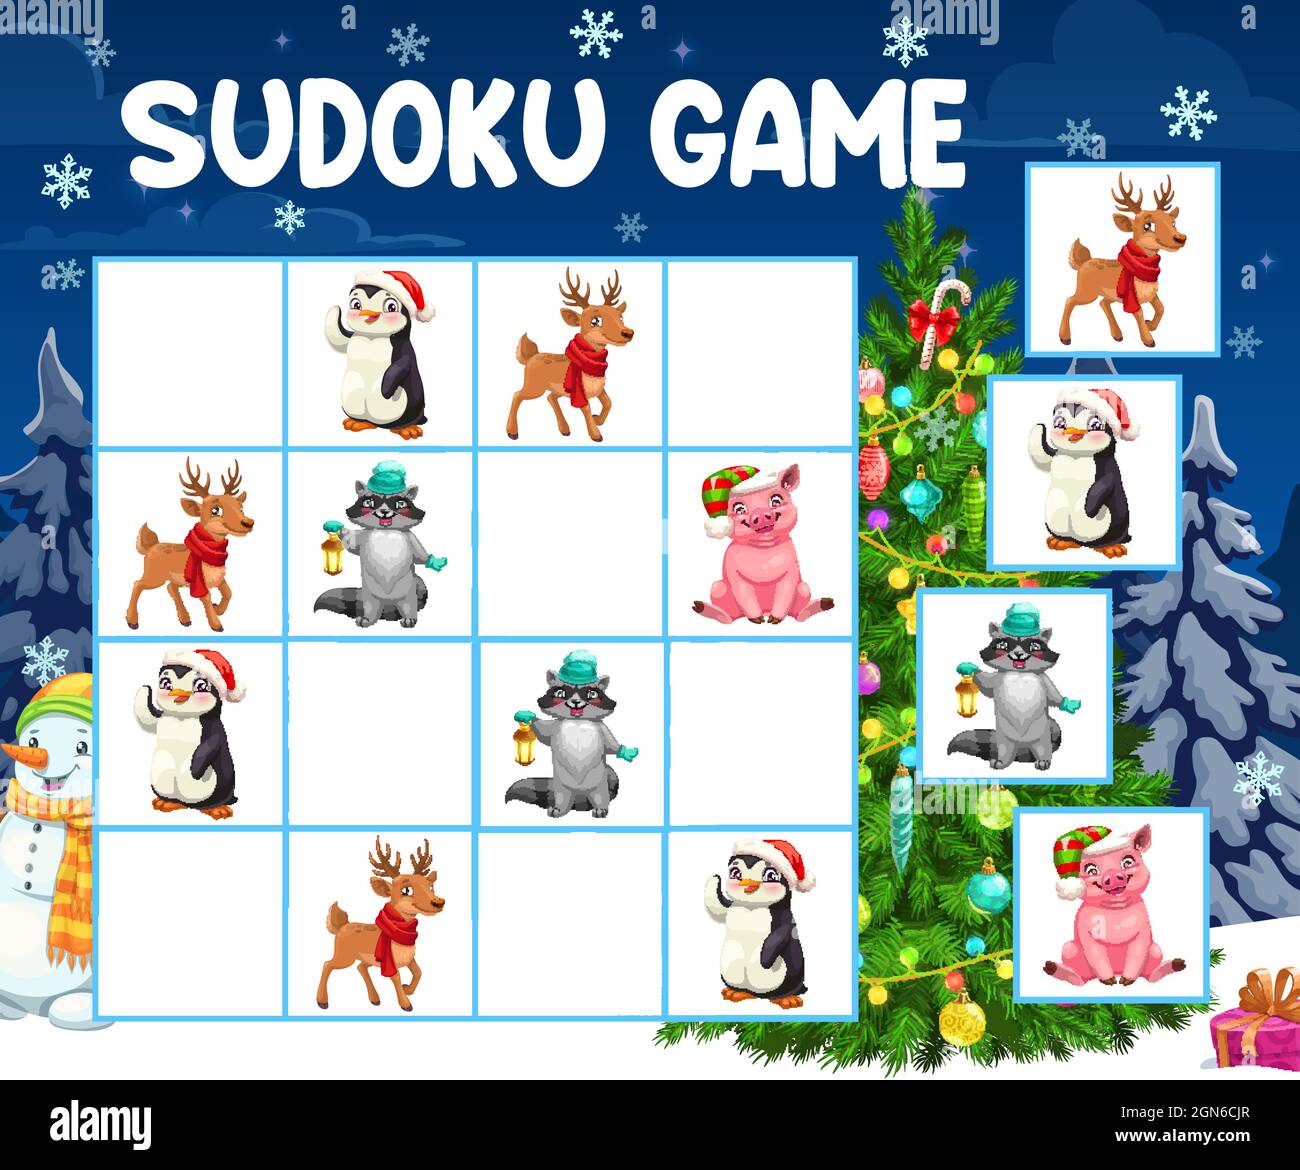 Sudoku game or puzzle with vector Christmas tree and animals. Logic mind game, puzzle, riddle or children education worksheet template with cartoon reindeer, pig and penguin, Christmas gifts, lights Stock Vector